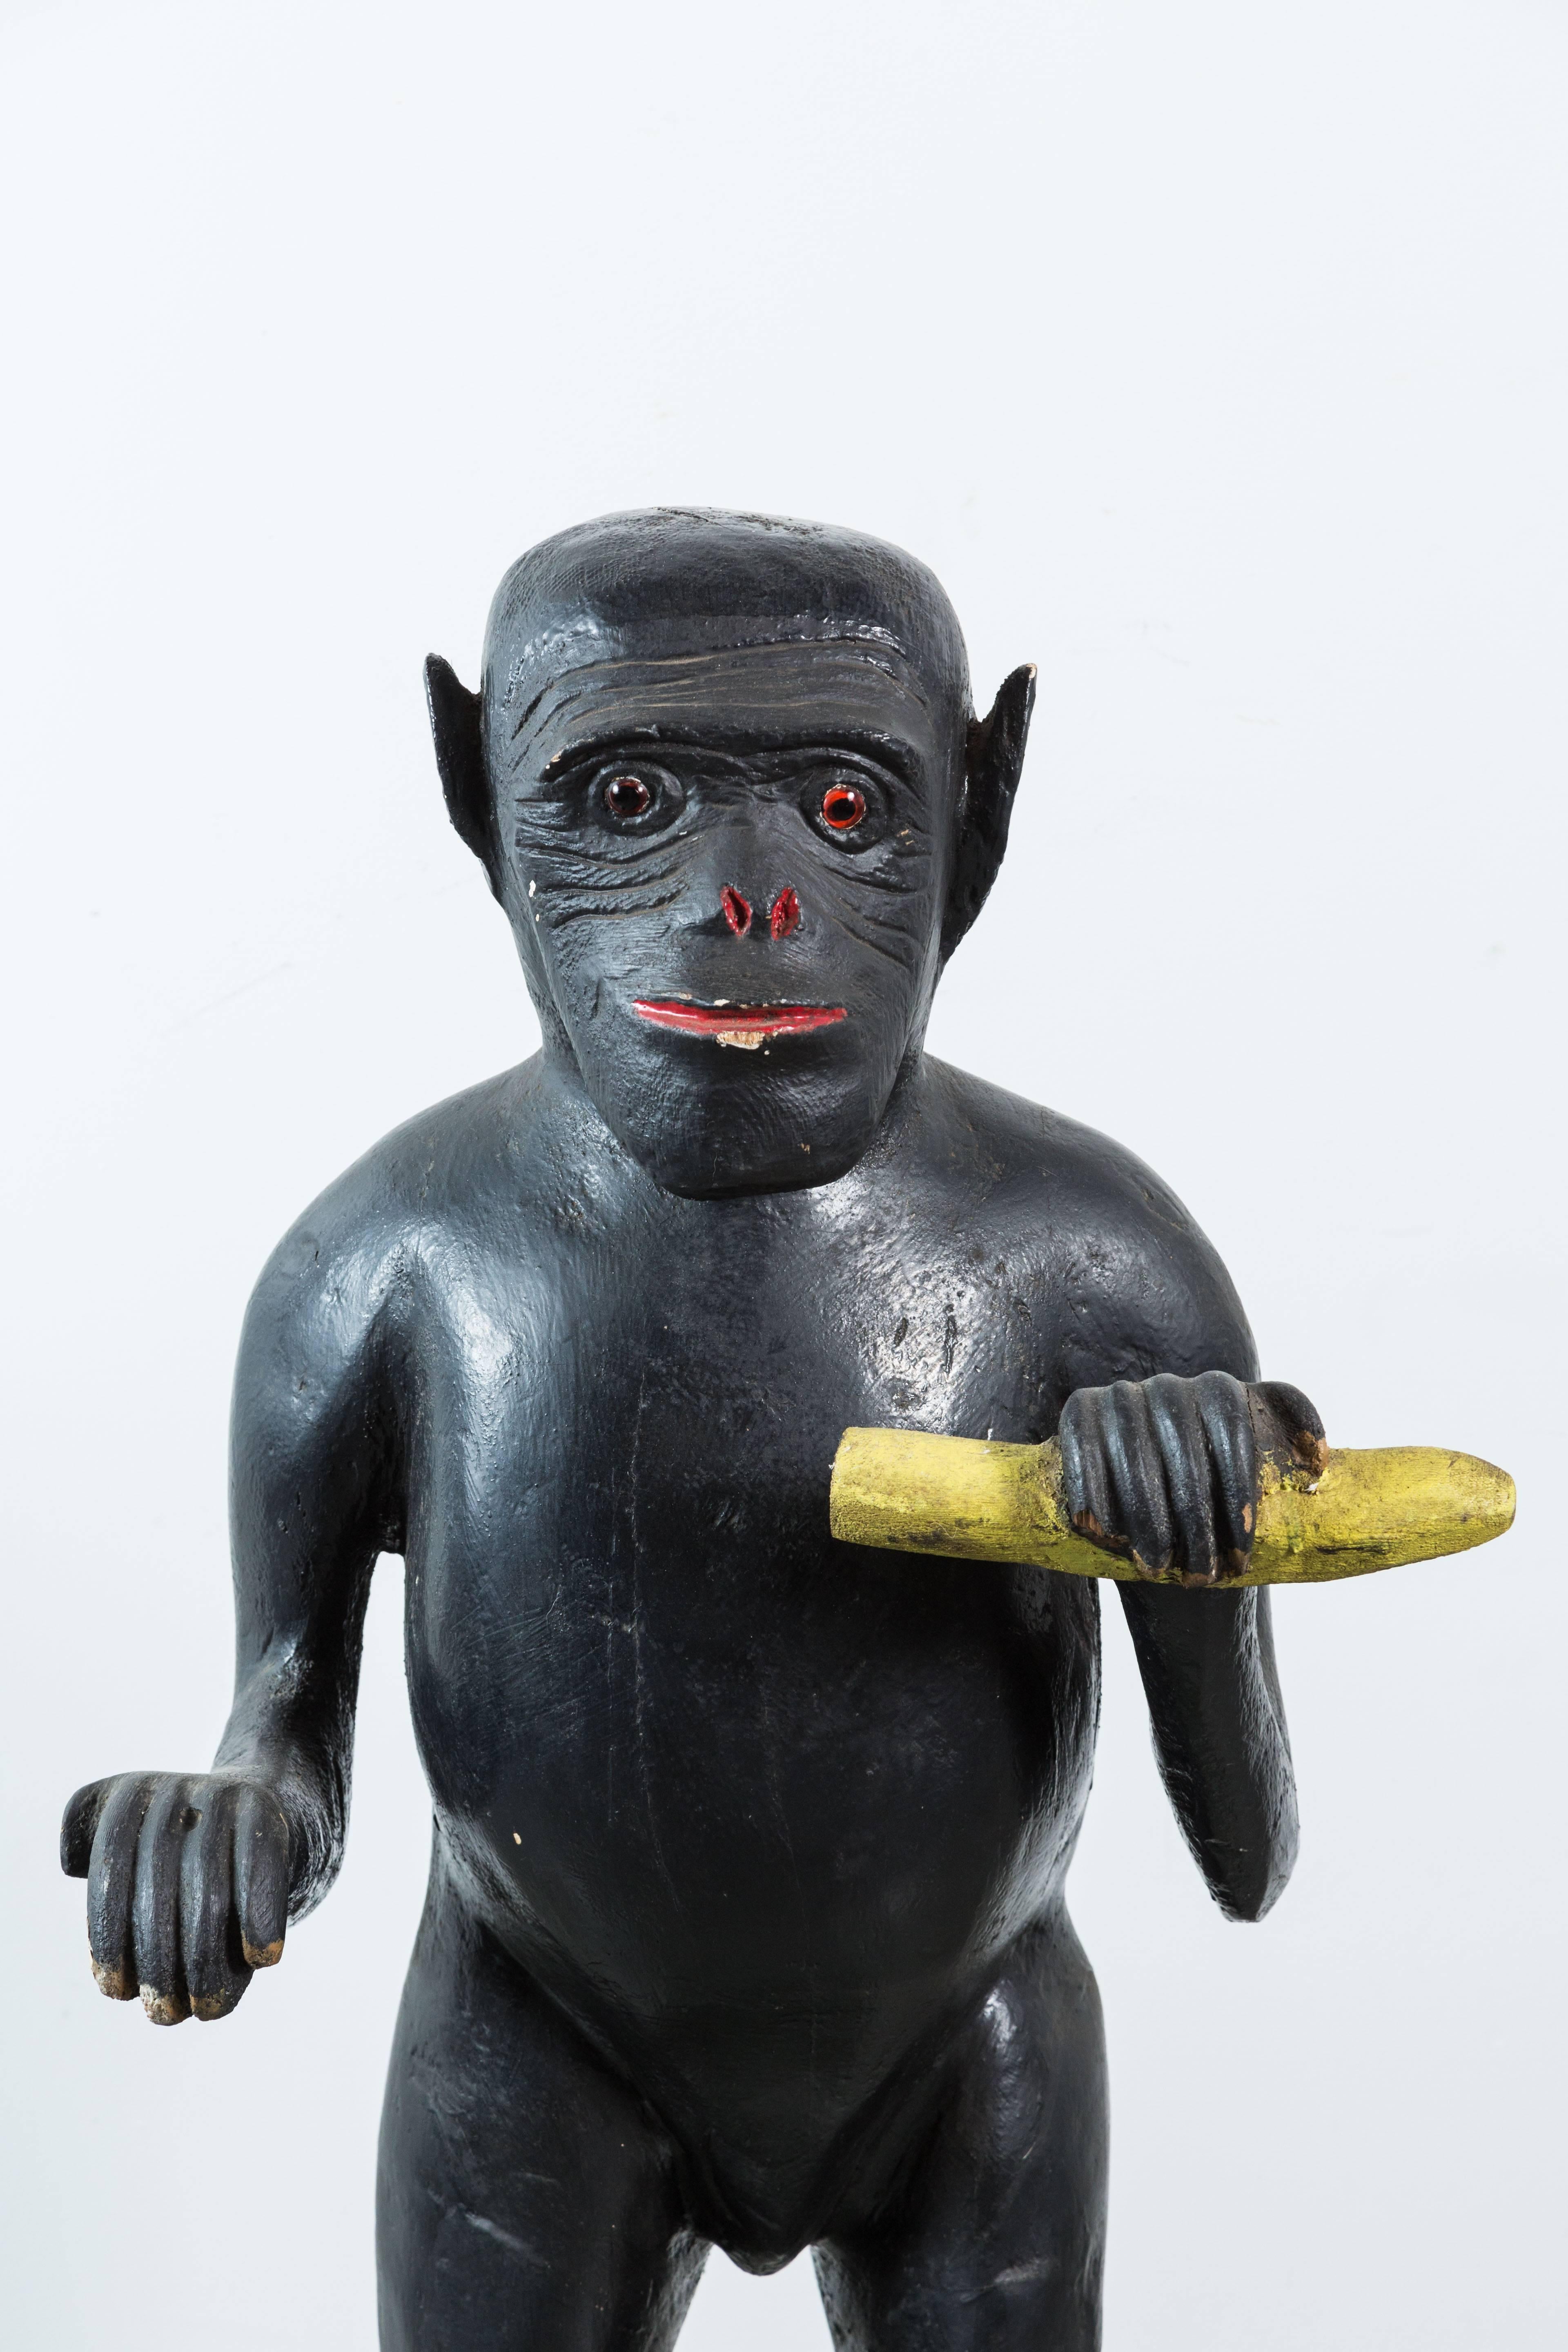 Vintage wood carved monkey with banana. Pretty expressive with glass eyes and original paint surface. Perhaps a throw back from Norma Desmond and Sunset Boulevard? Life-sized carving.